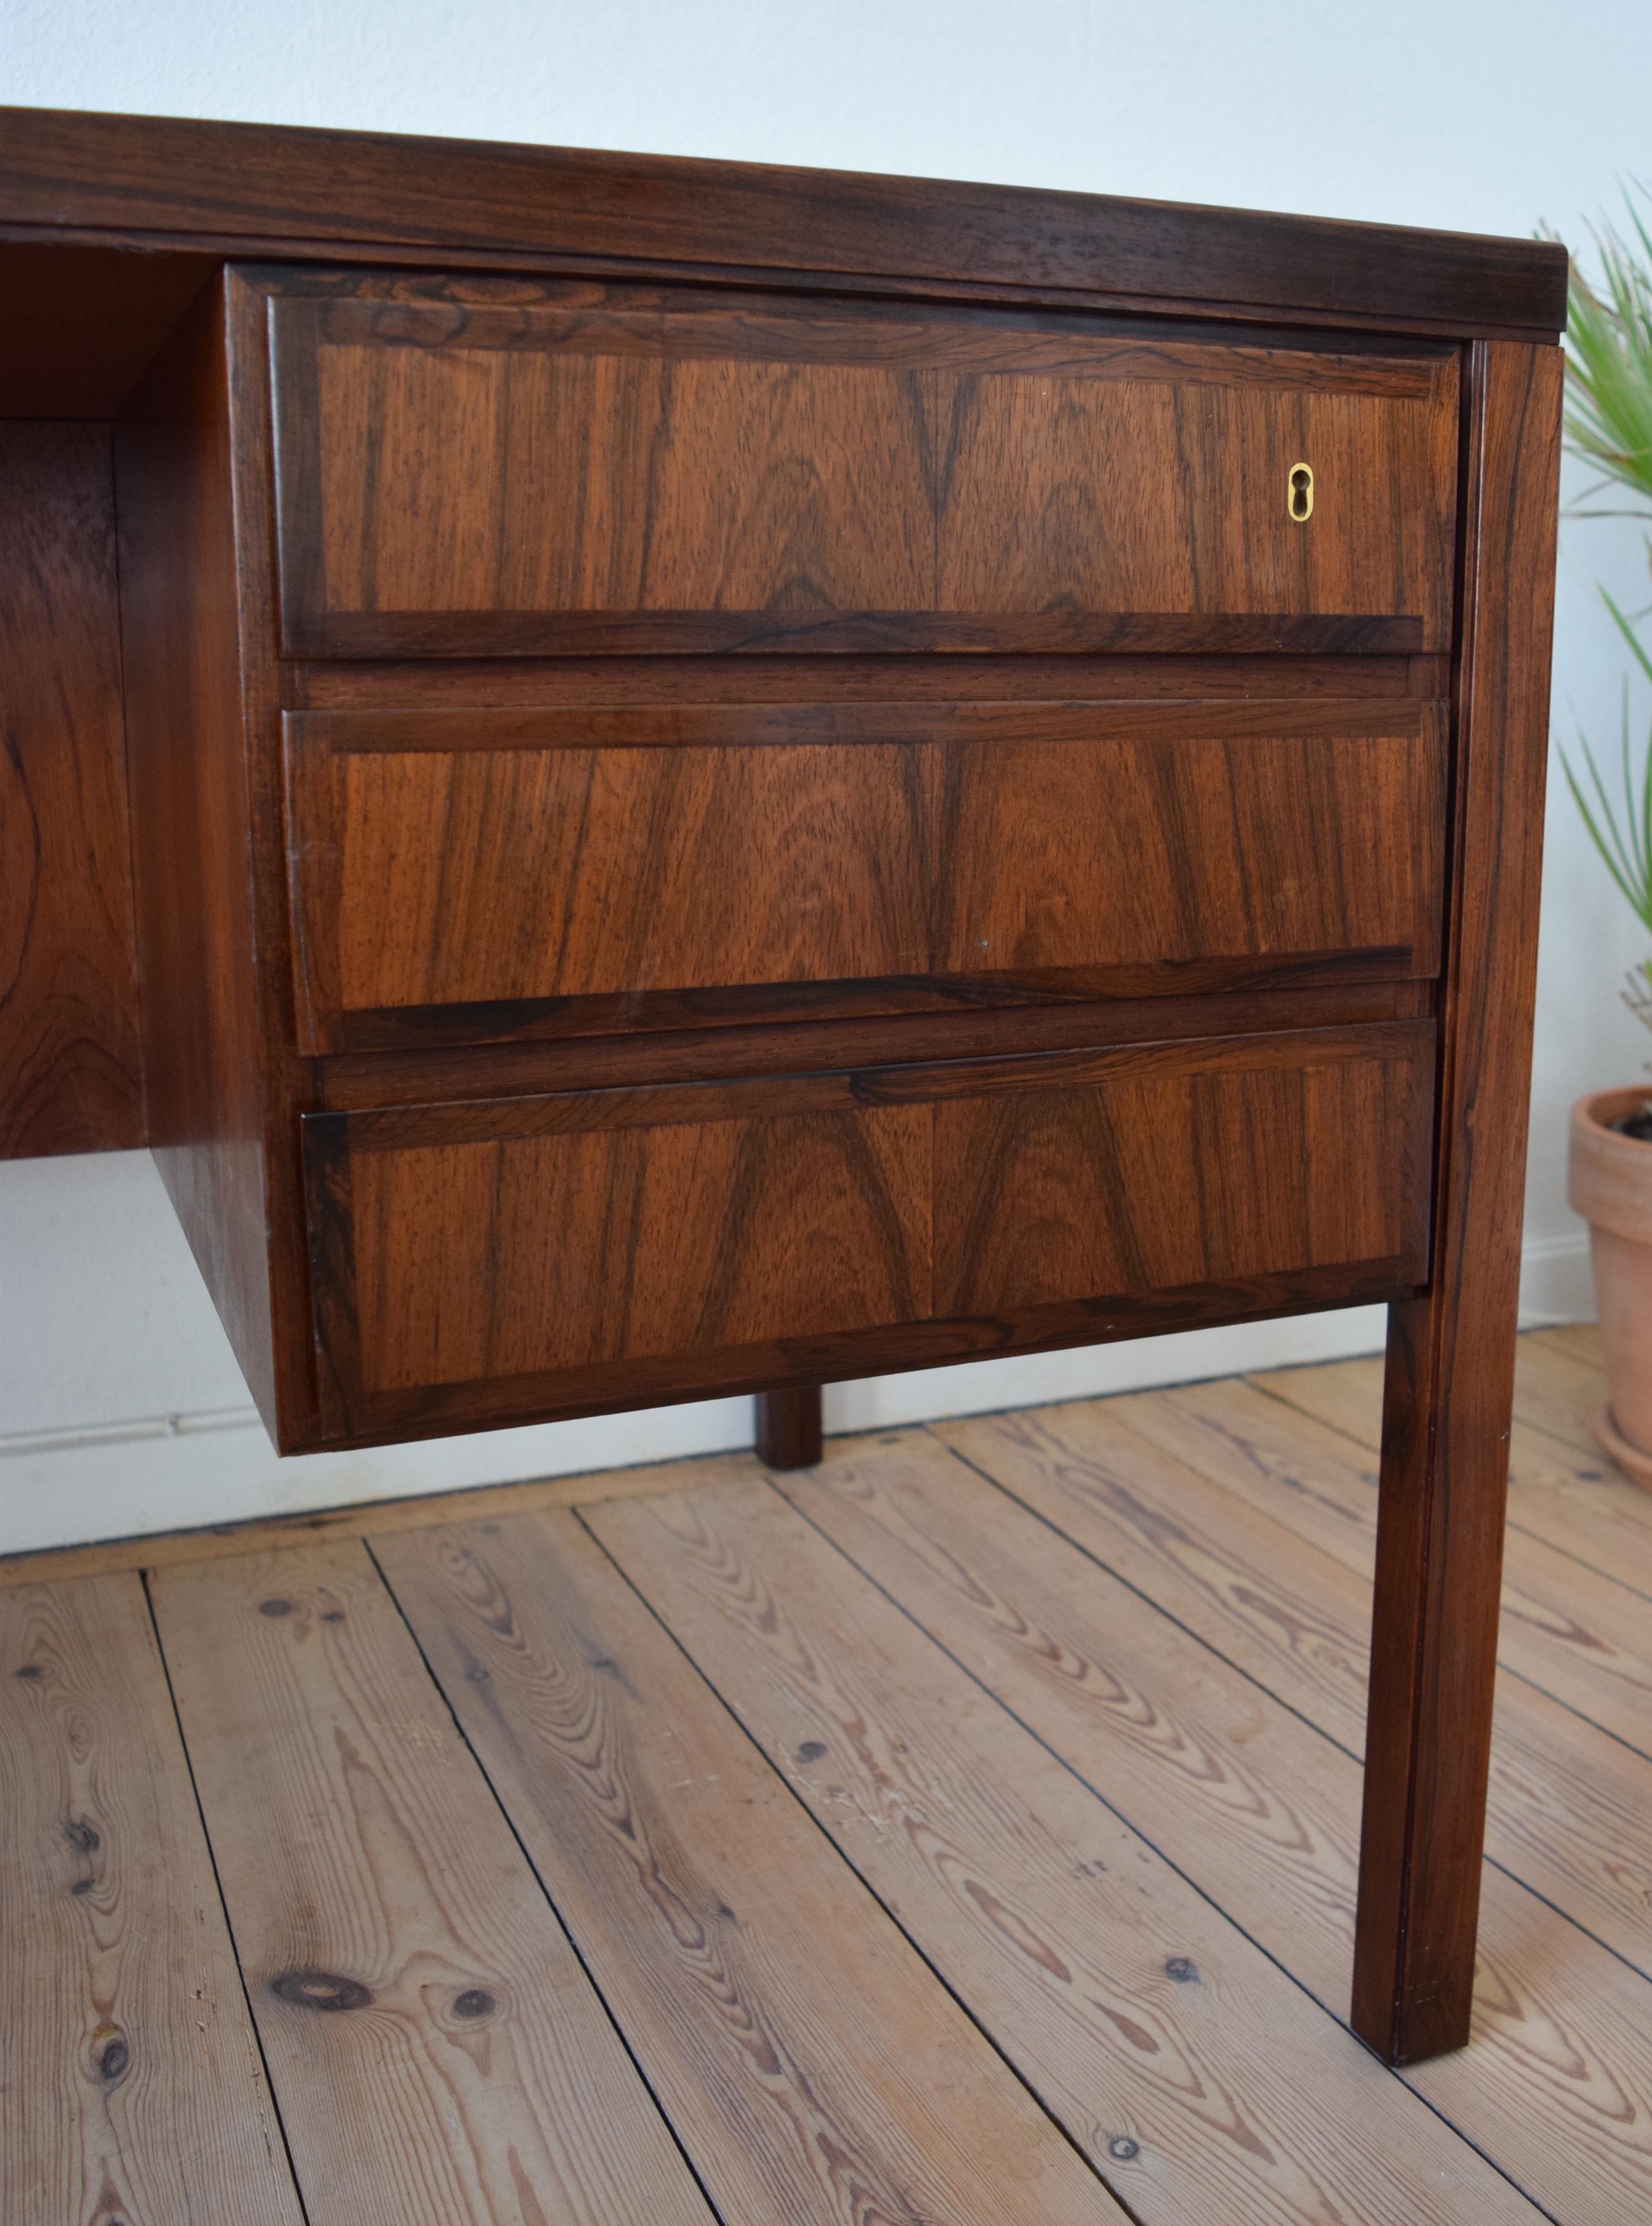 Large executive model 77 desk designed by Gunni Omann for Omann Jun Møbelfabrik, Denmark in the 1960s. This solid desk features six drawers (lockable) with bevelled edges and solid rosewood fronts with matched grain. On the rear are two compartments